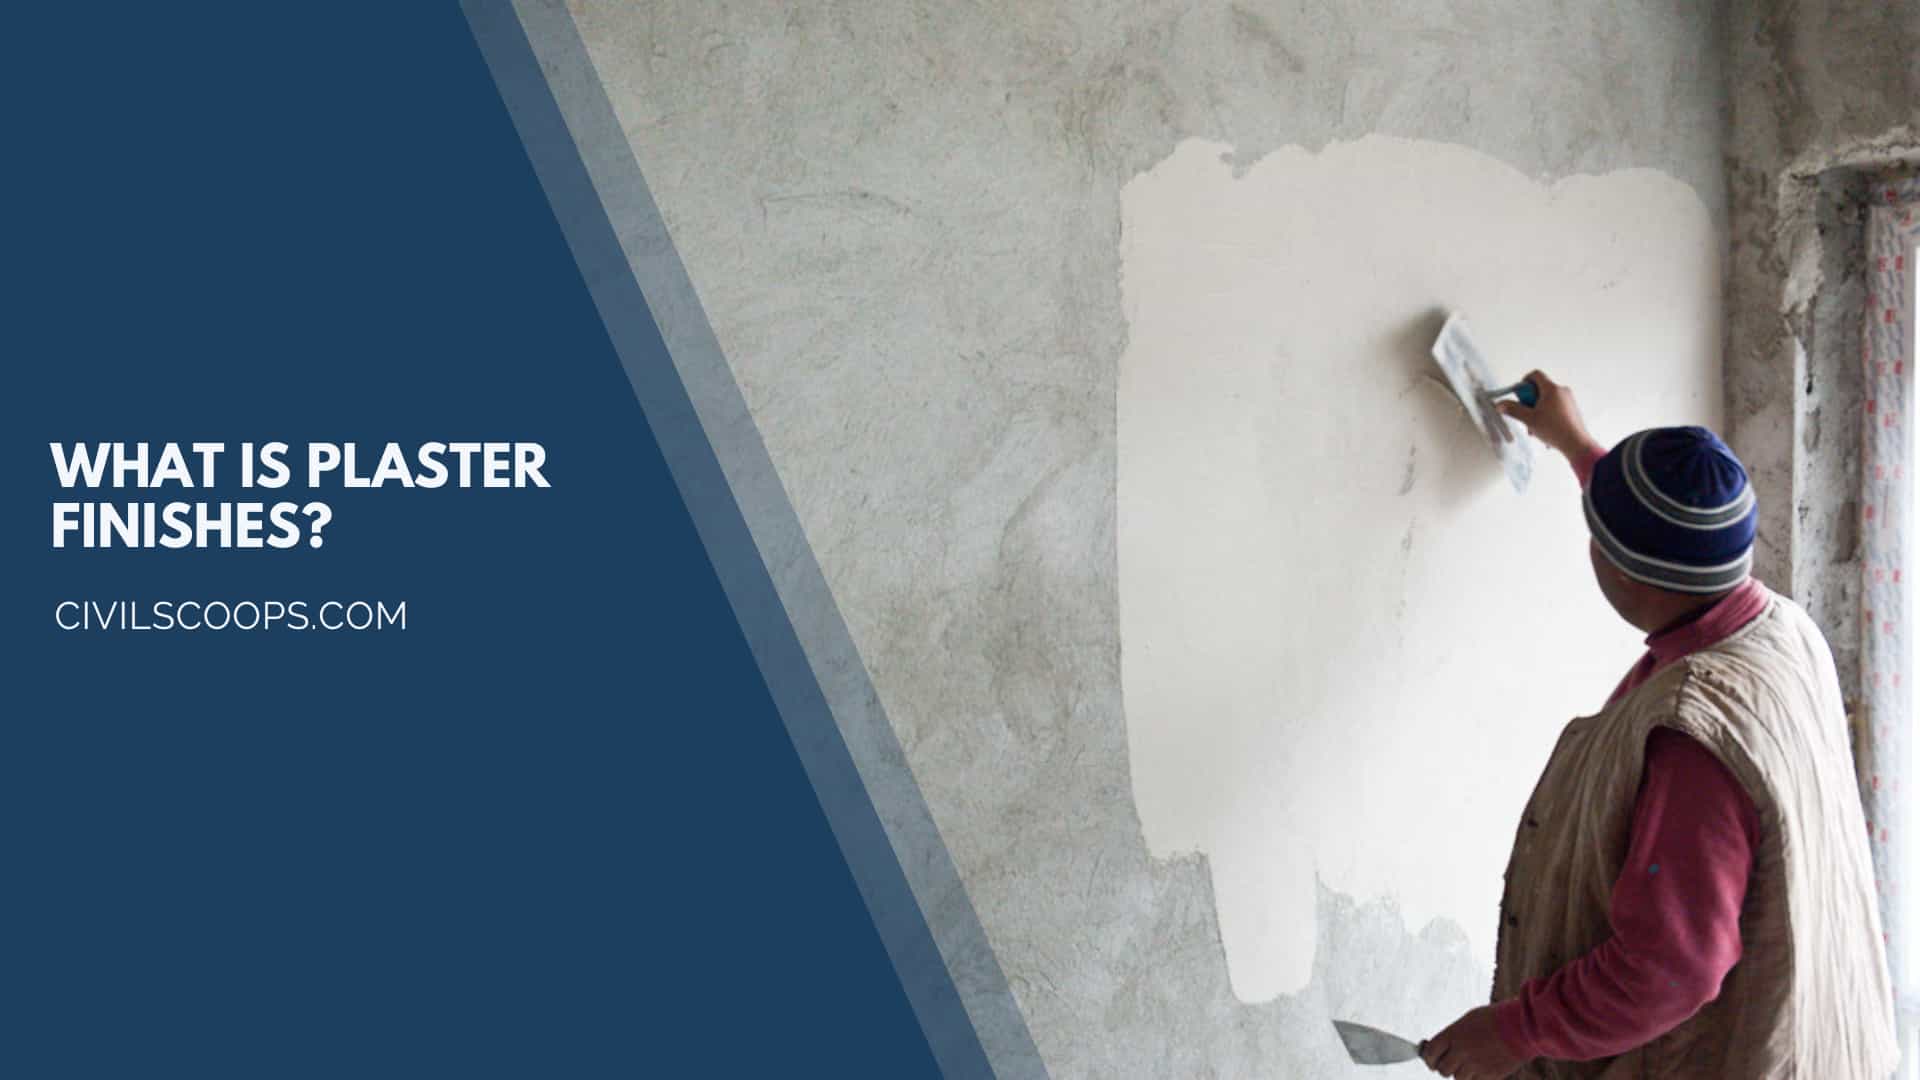 What is Plaster Finishes